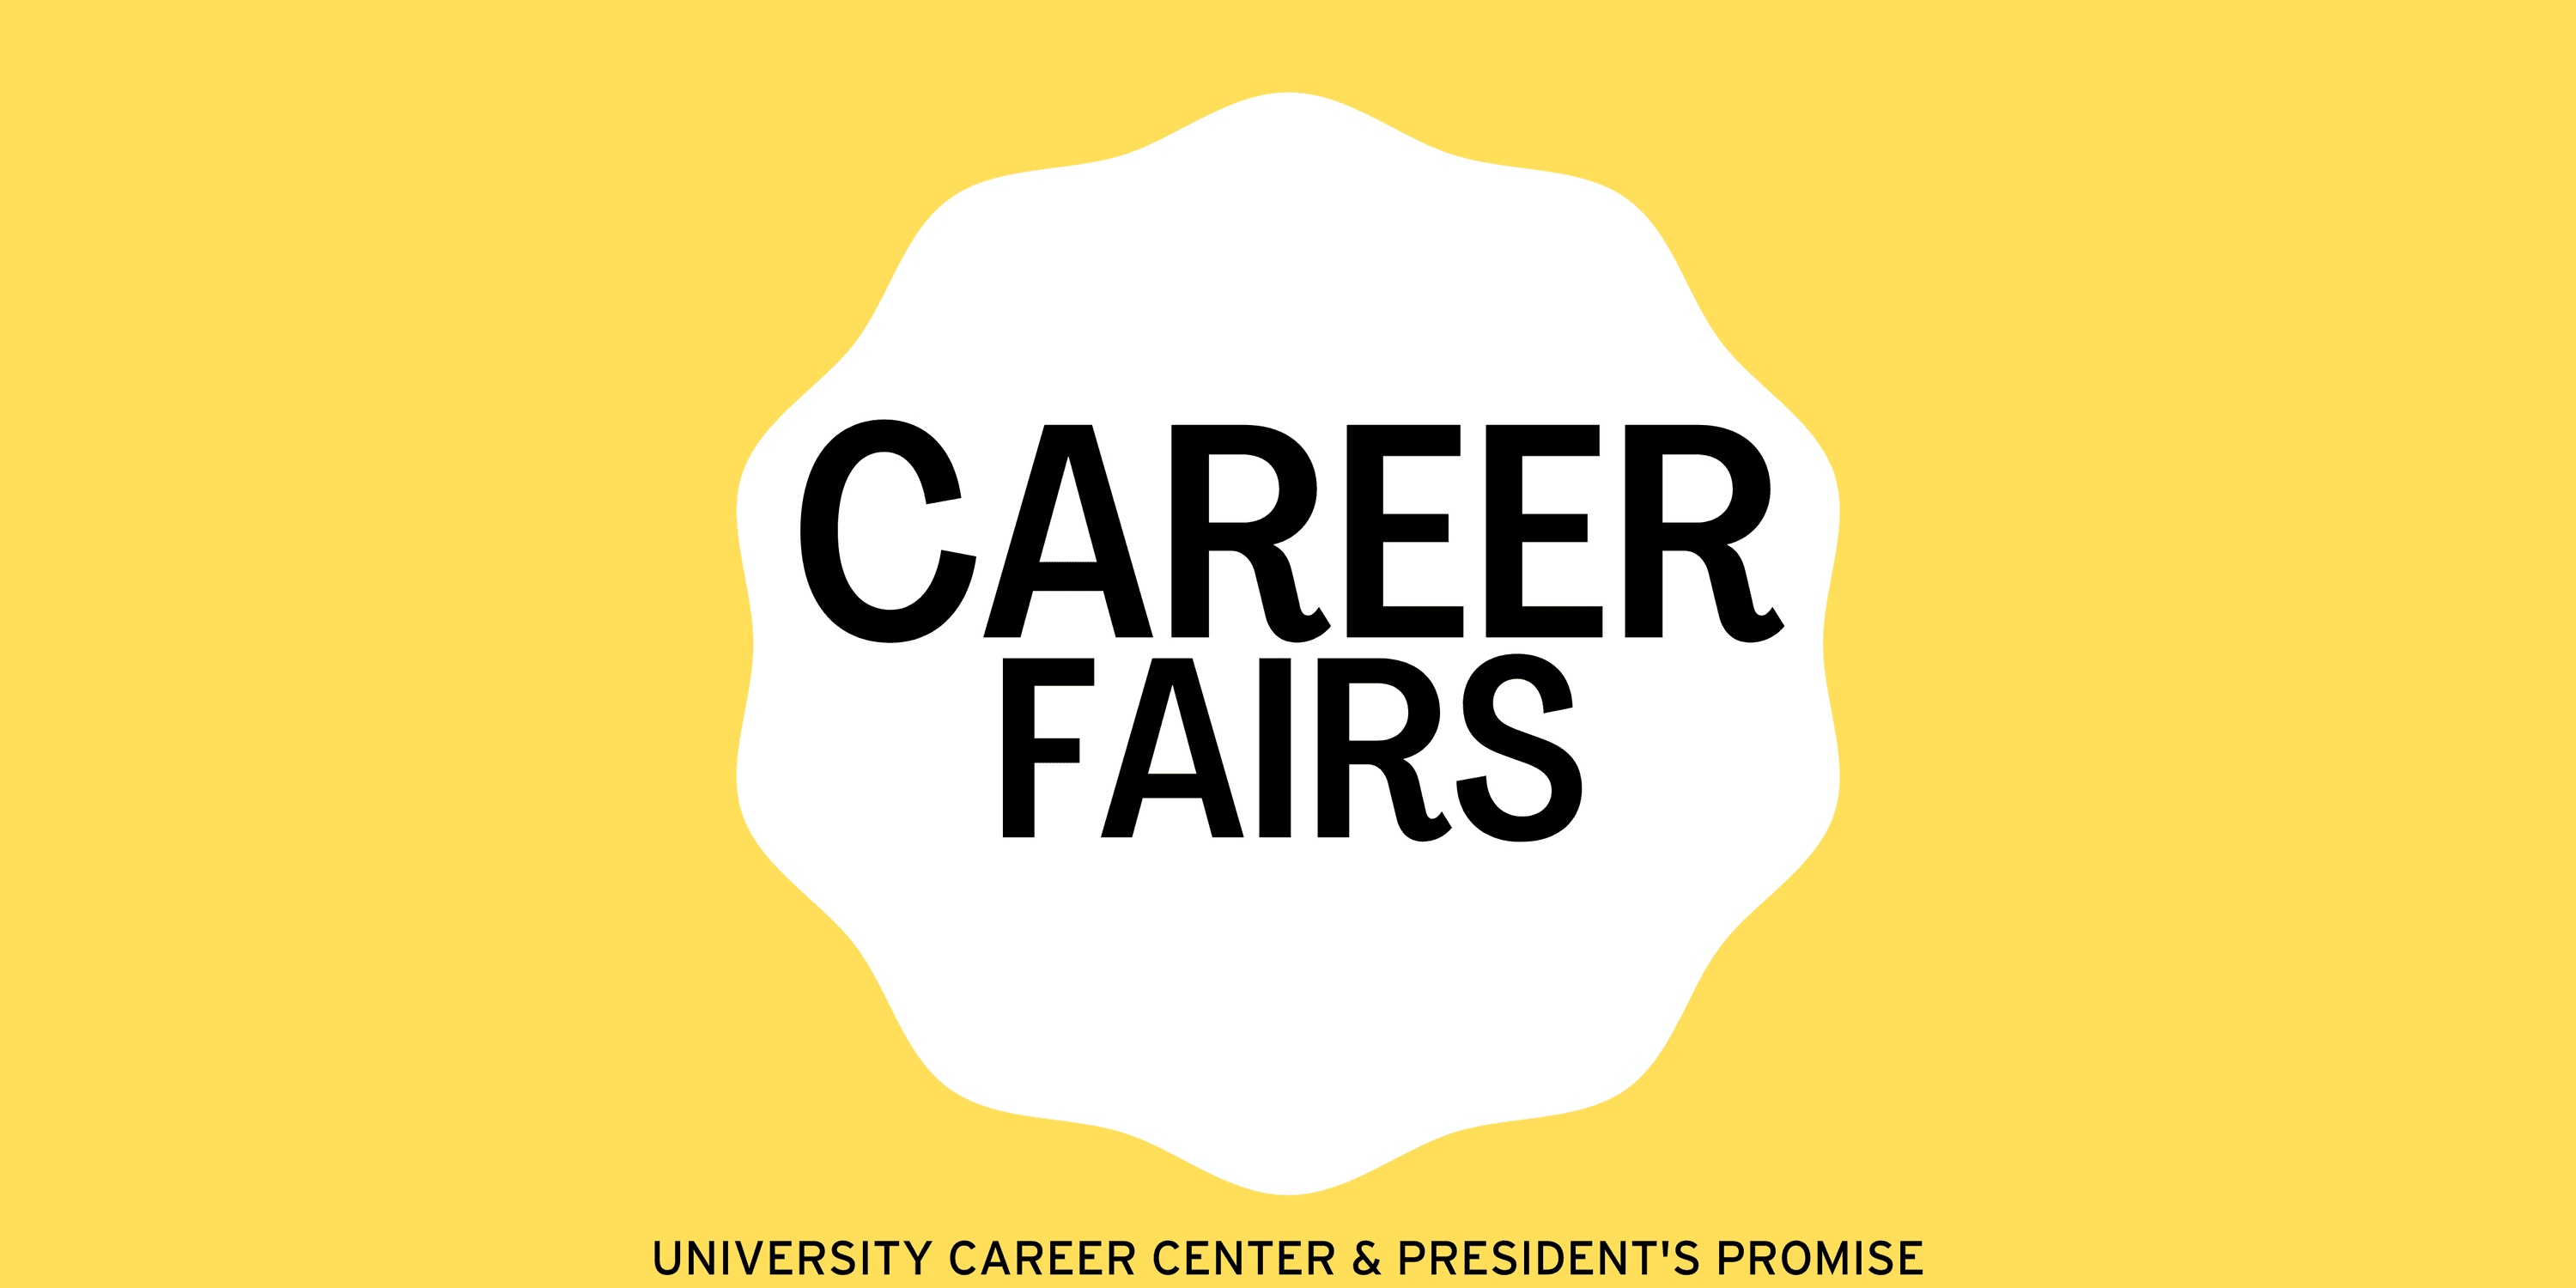 A yellow background with text that says, "Career Fairs". There is a white cloud shape surrounding the text.